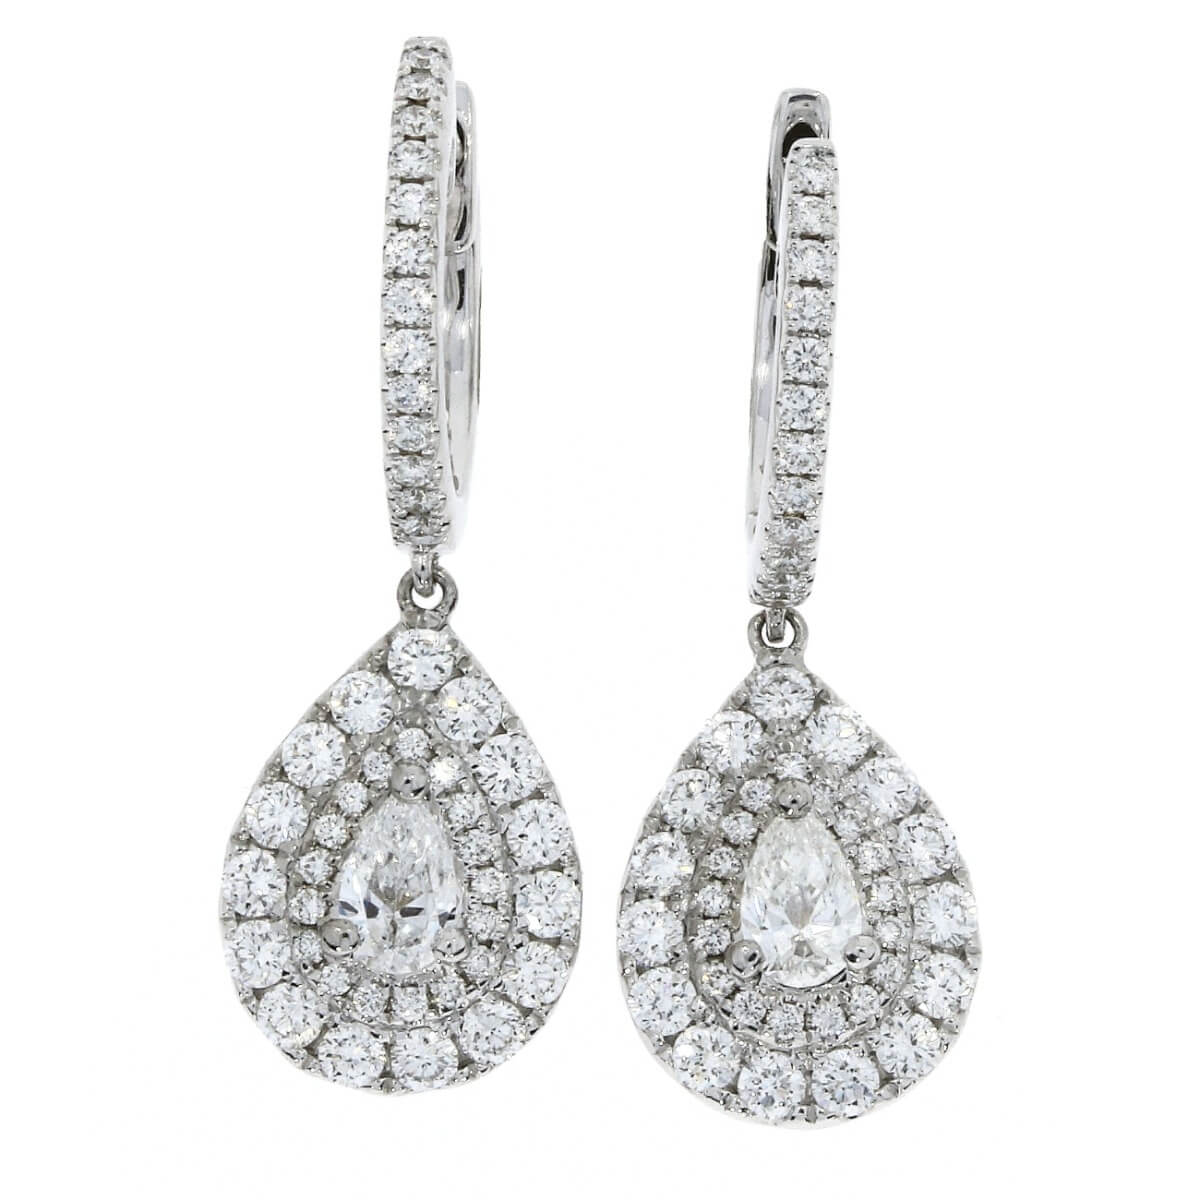 18ct white gold pear shaped drop style diamond earrings 19706g8